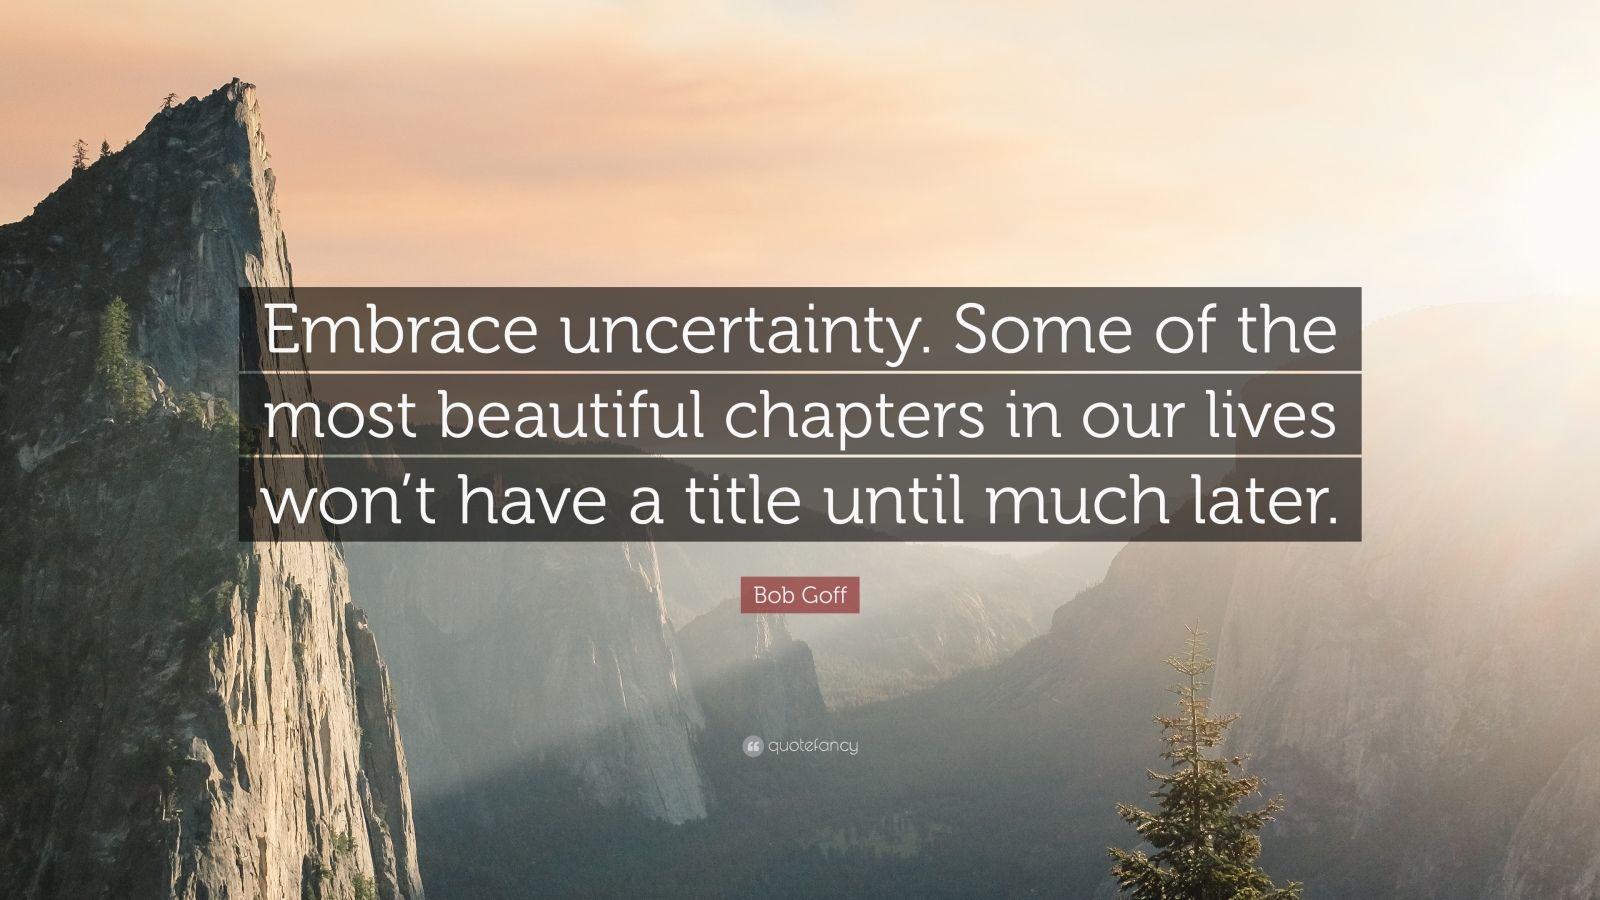 Bob Goff Quote: “Embrace uncertainty. Some of the most beautiful